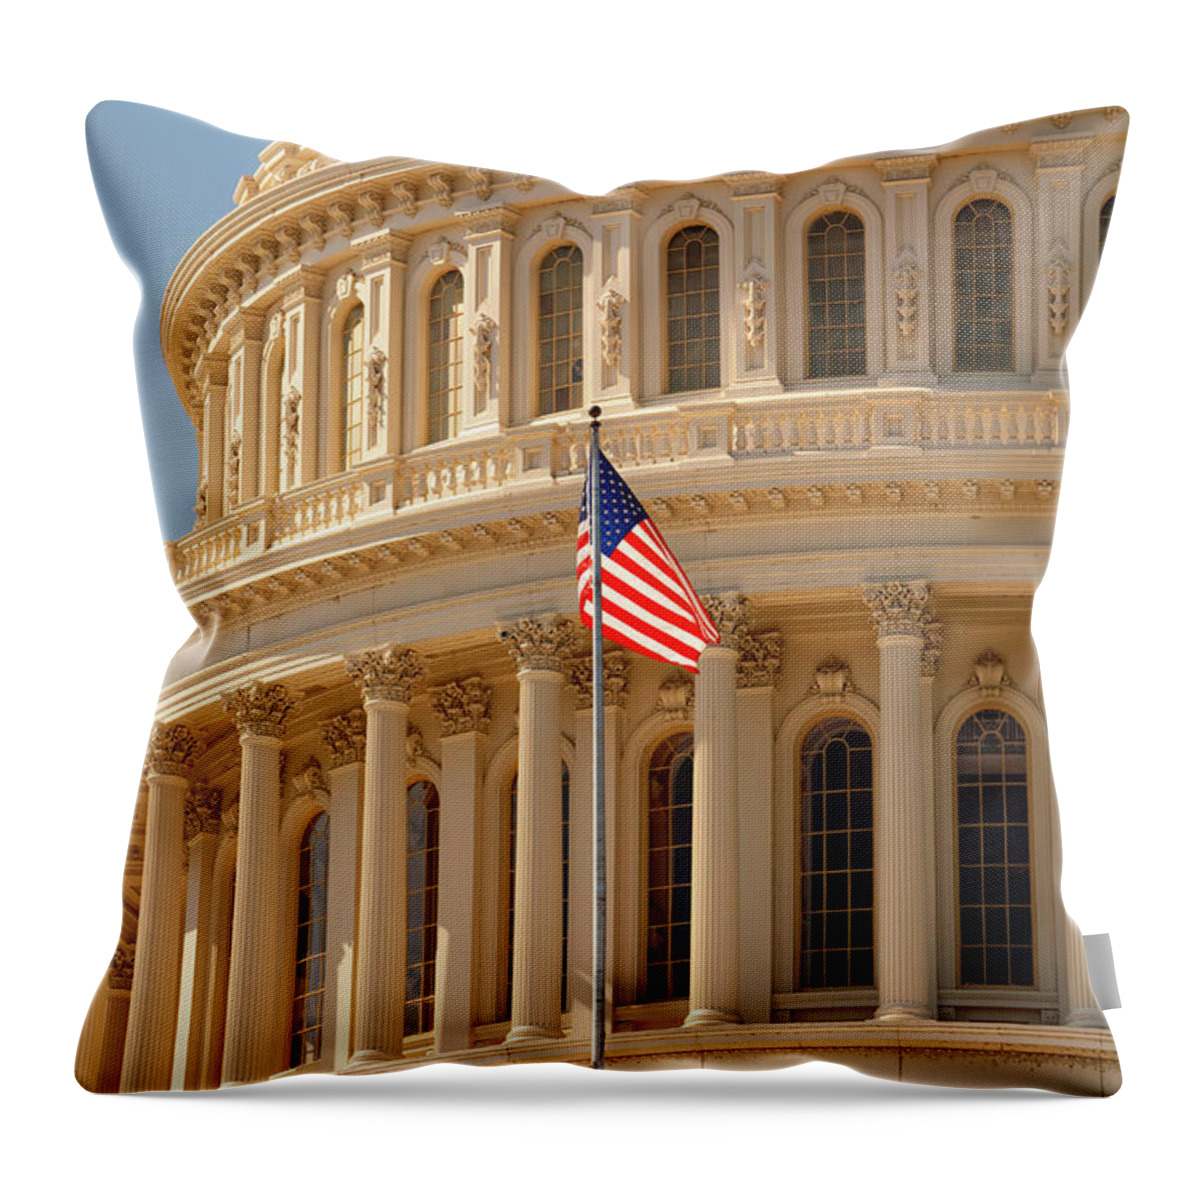 Democracy Throw Pillow featuring the photograph The Dome Of The United States Capitol by Owen Franken